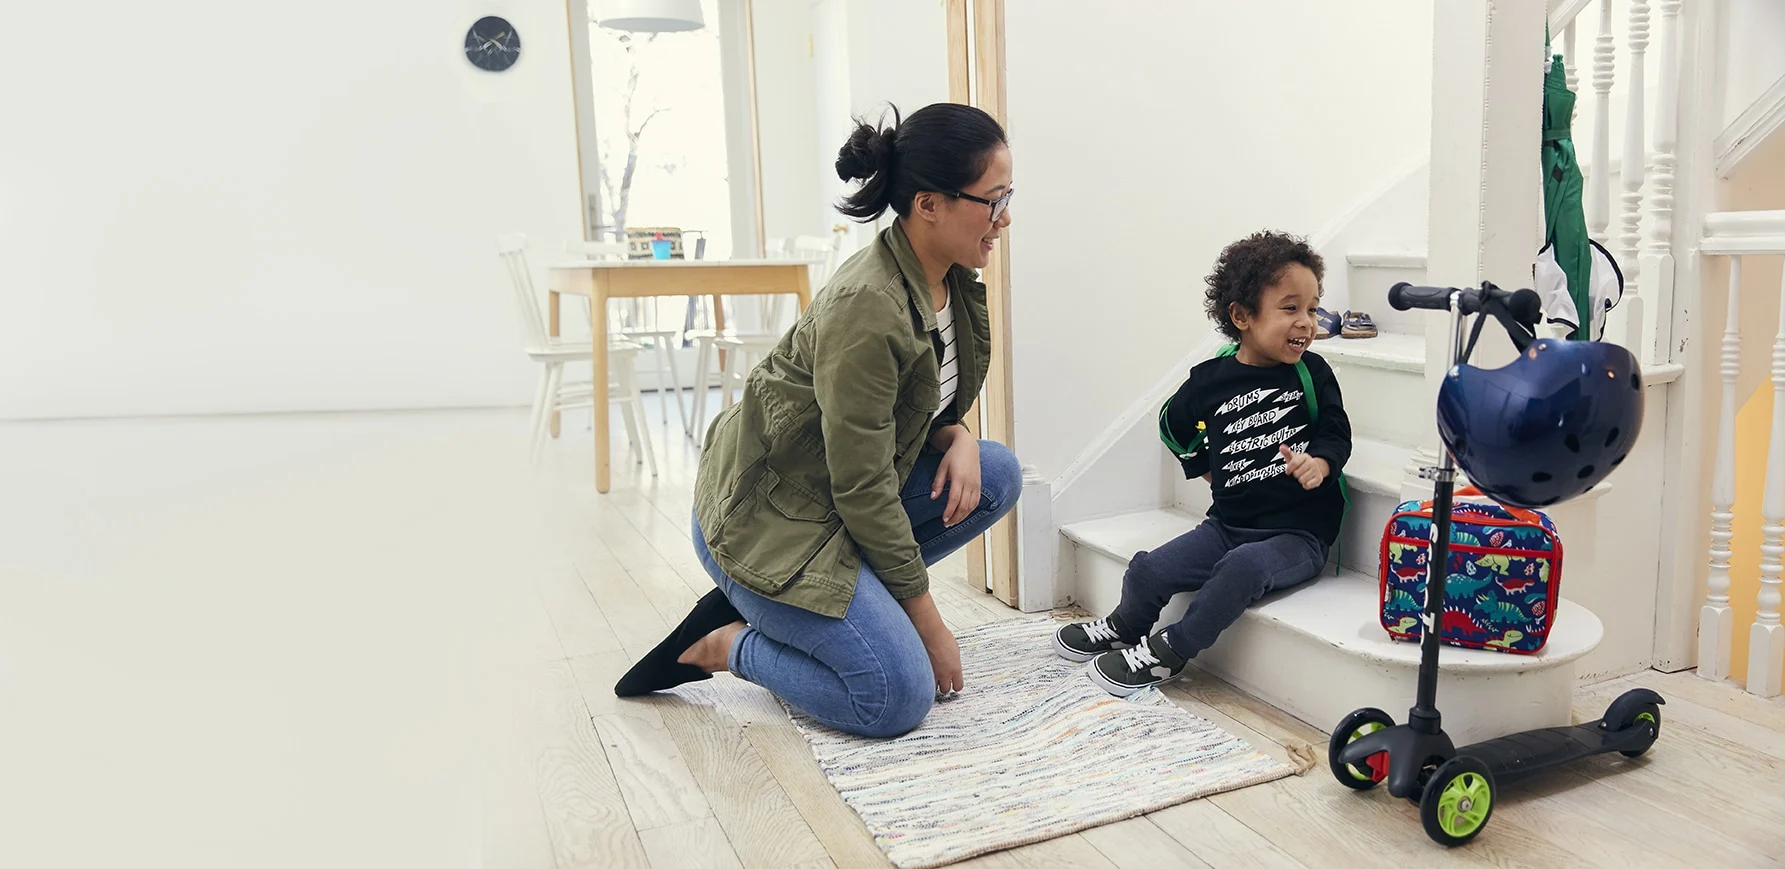 Looking for a babysitter to watch kids after school? UrbanSitter has a Los Angeles network of great nannies and babysitters. #urbansitter #homework #childcare #babysitter 